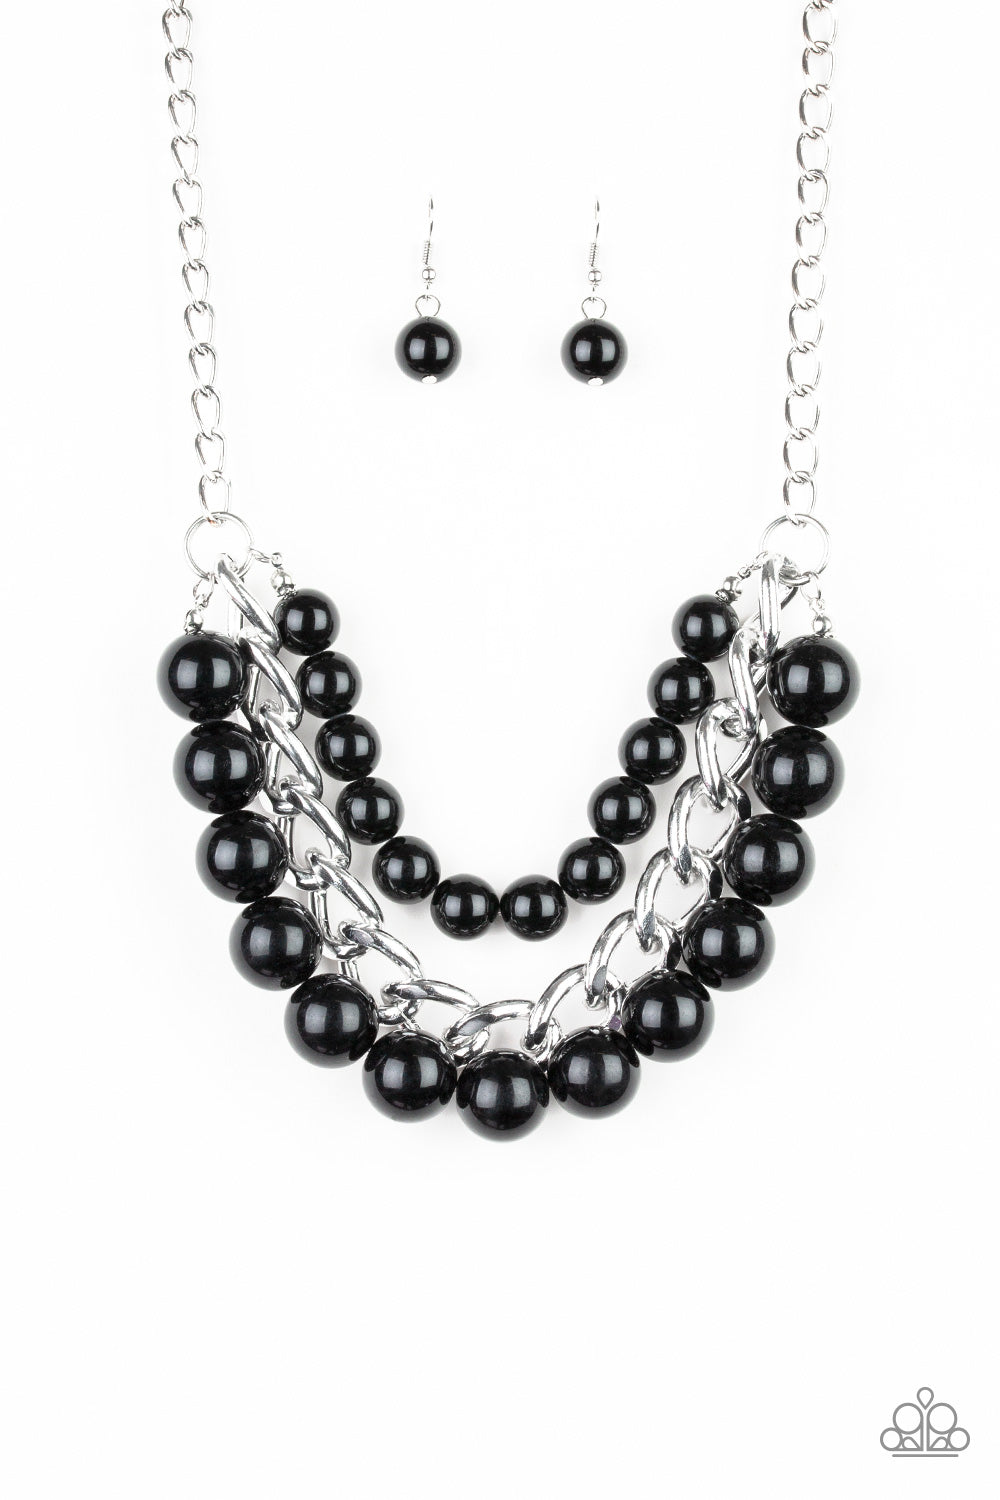 Two strands of dramatic black beads flank one strand of oversized silver chain, creating statement-making layers below the collar. Features an adjustable clasp closure.